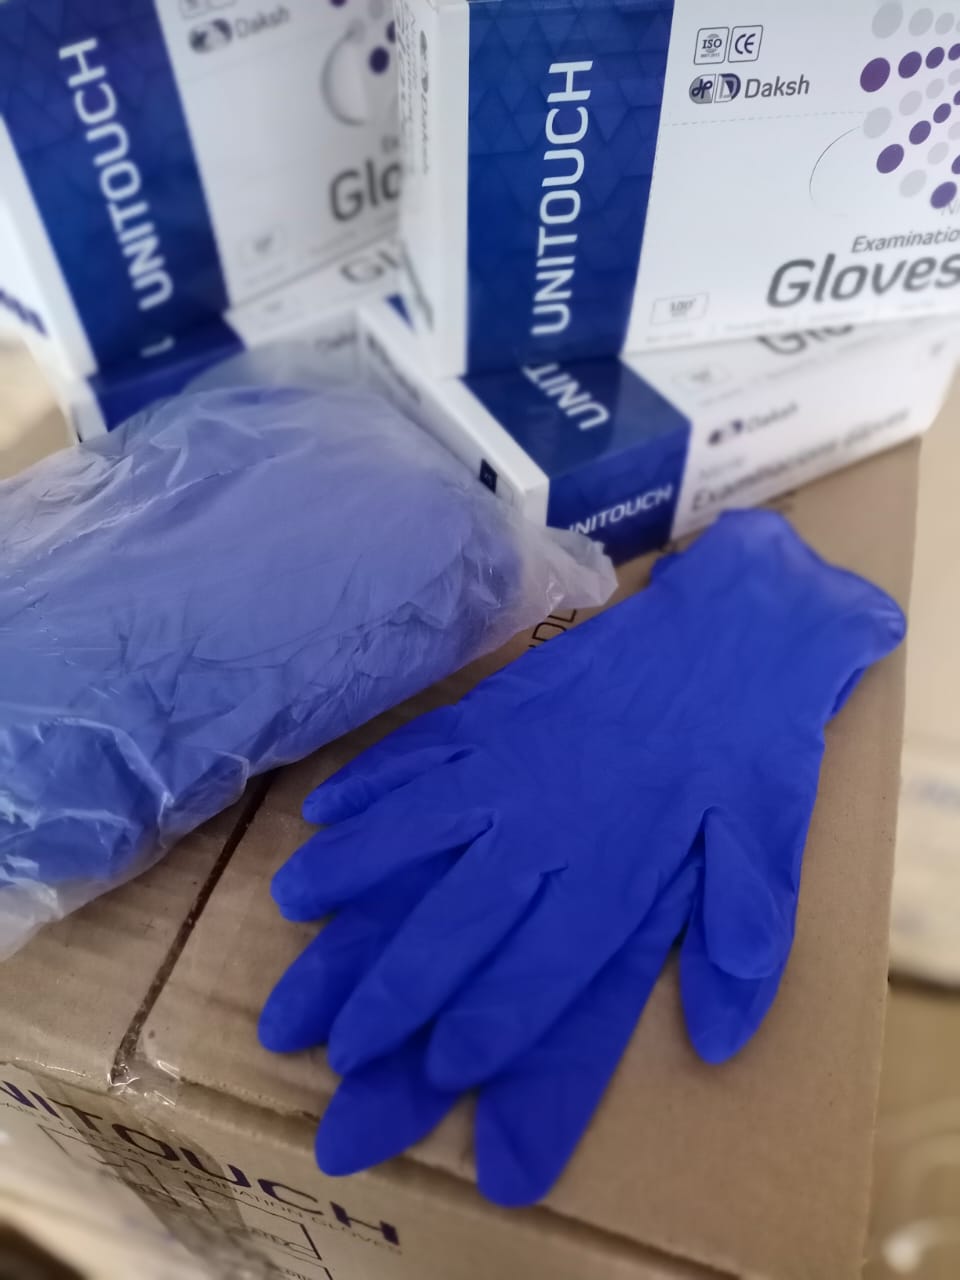 Surgical Gloves In Chandigarh | Shree Surgicals | Surgical Gloves In Chandigarh, best Surgical Gloves In Chandigarh, Surgical Gloves provider In Chandigarh, Surgical Gloves dealers In Chandigarh - GL73998